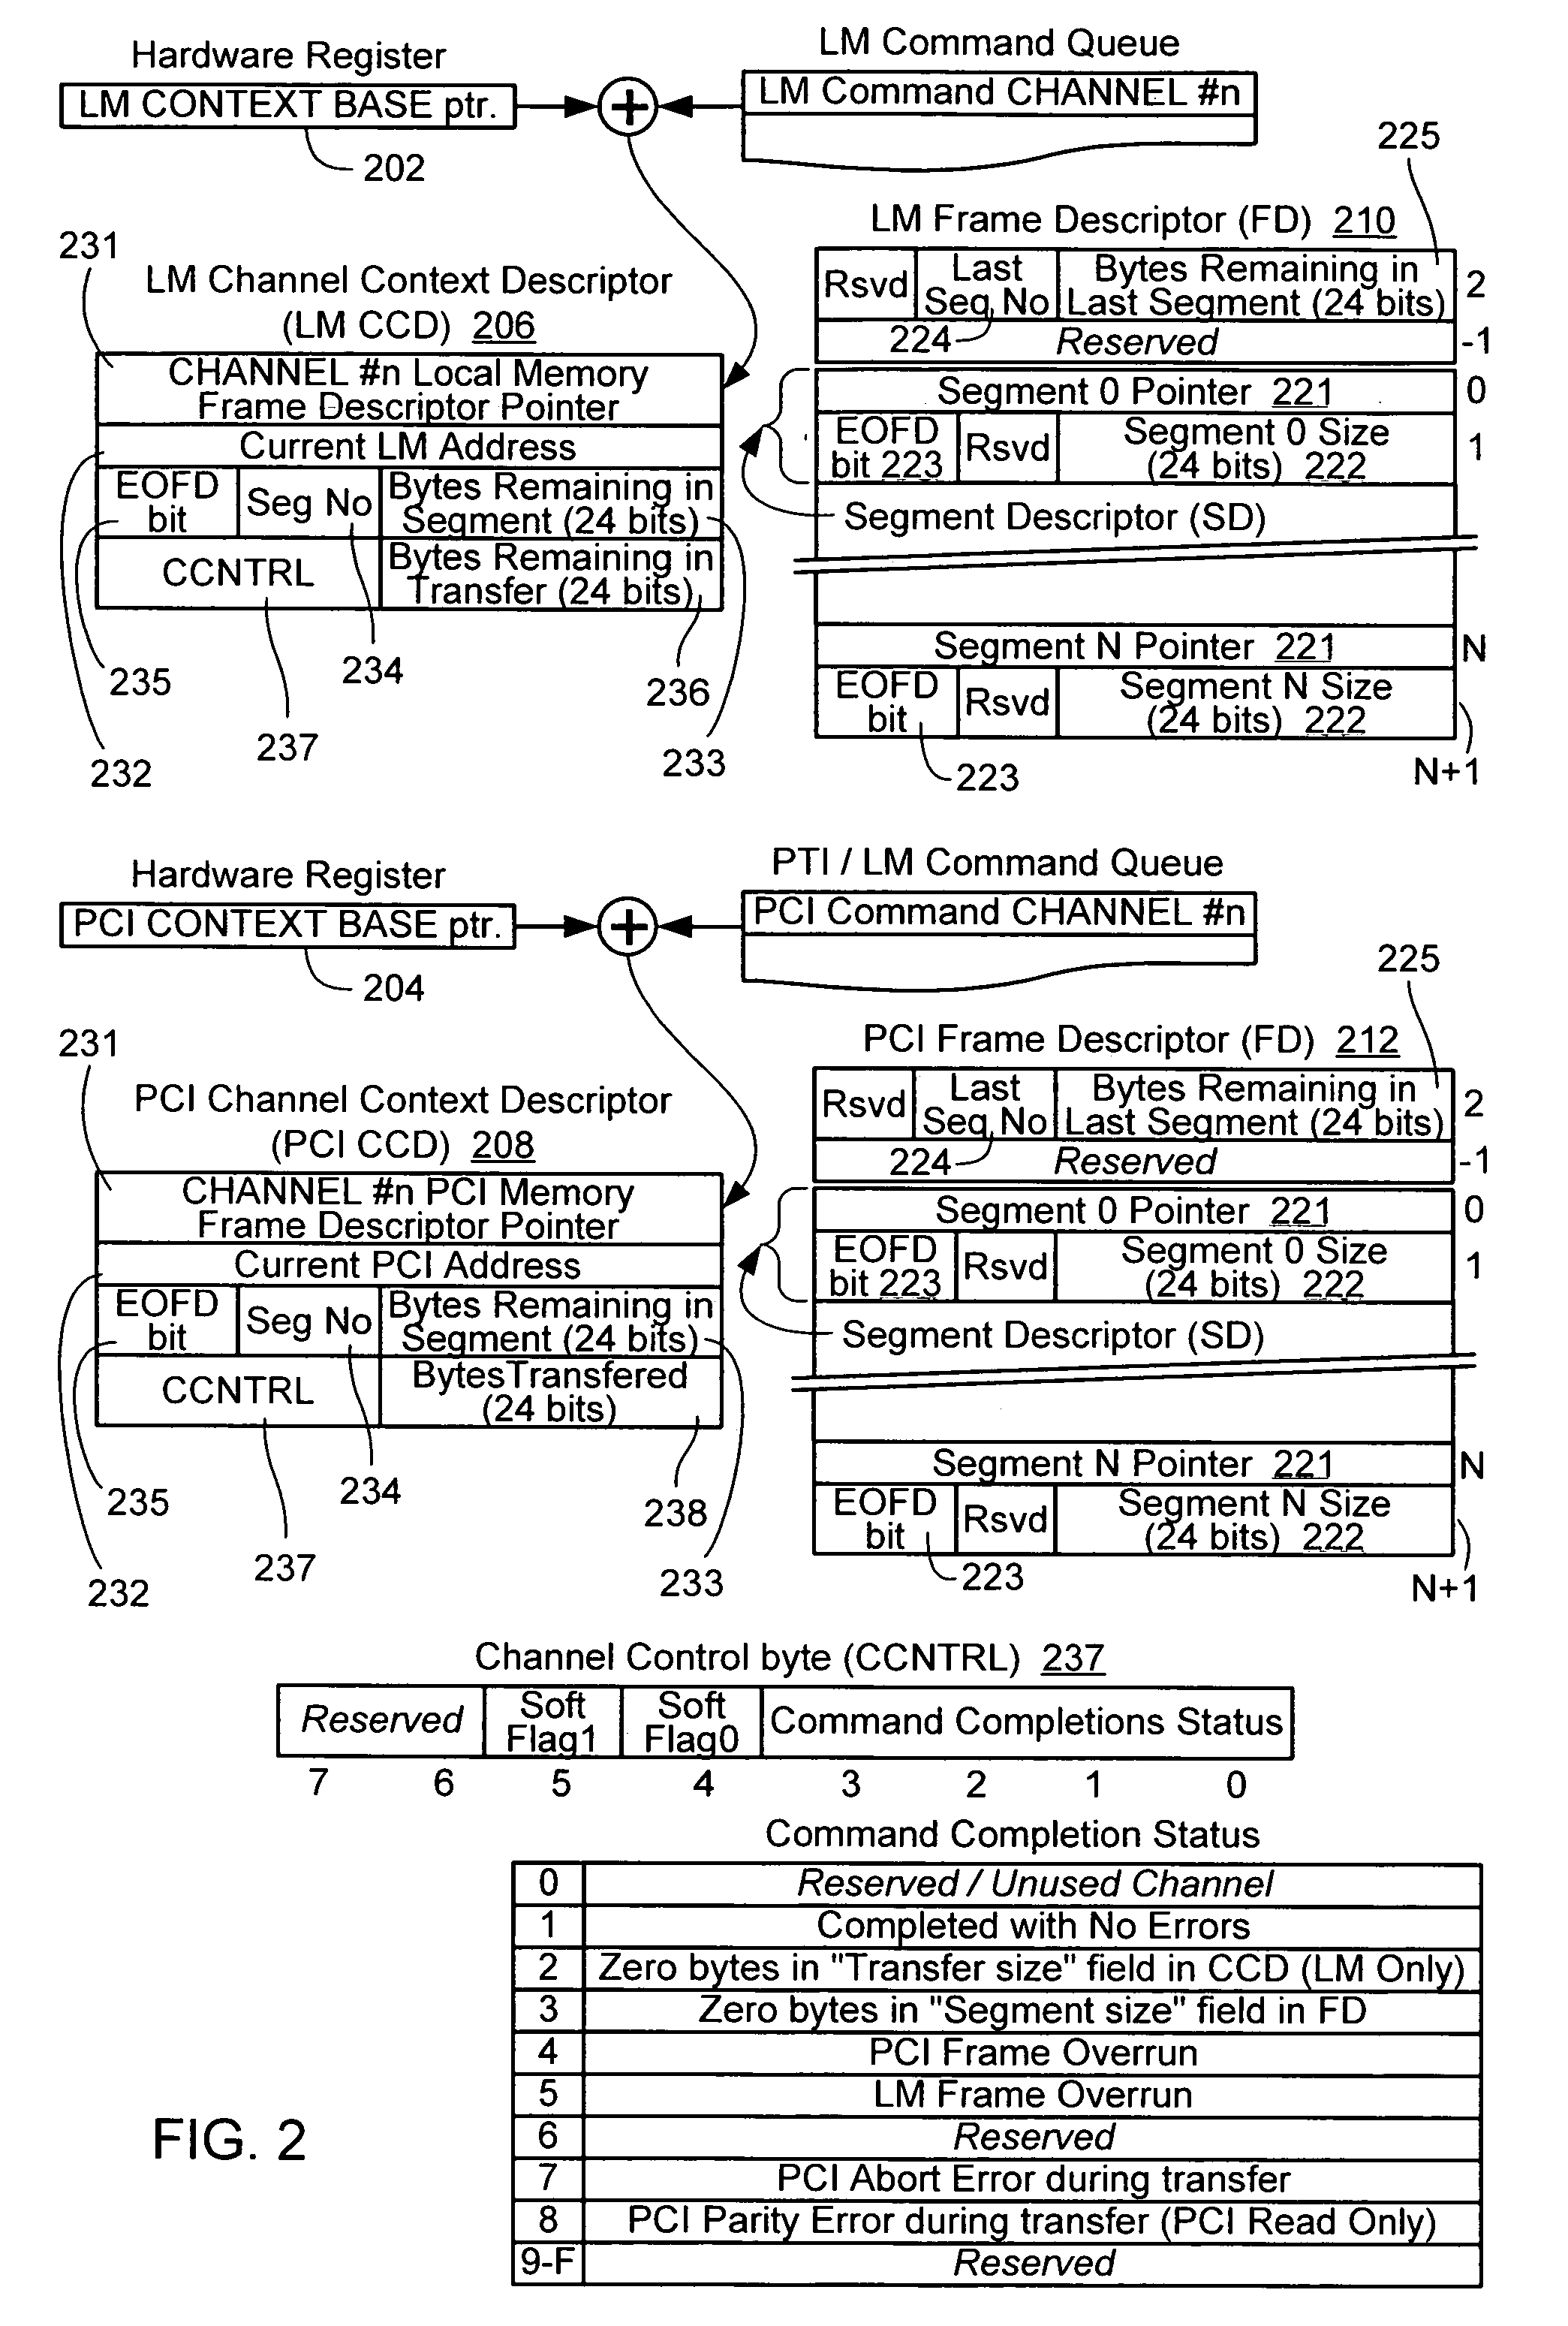 Multi-threaded direct memory access engine for broadcast data demultiplex operations